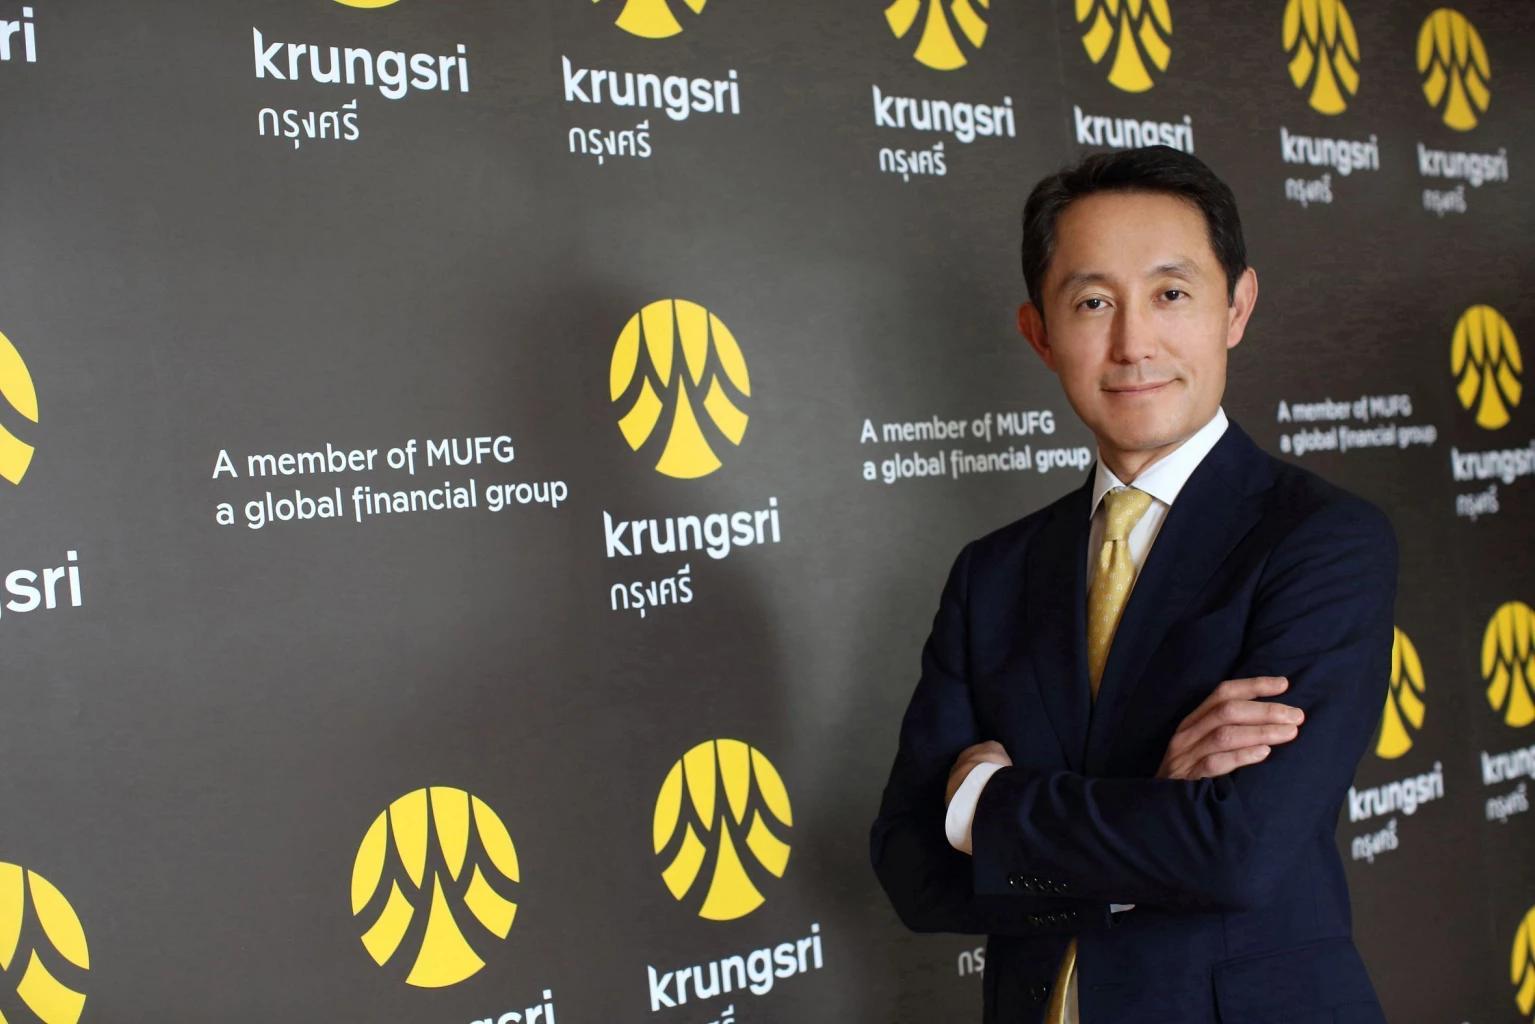 Krungsri reaffirms its continuous assistance to all groups of customers